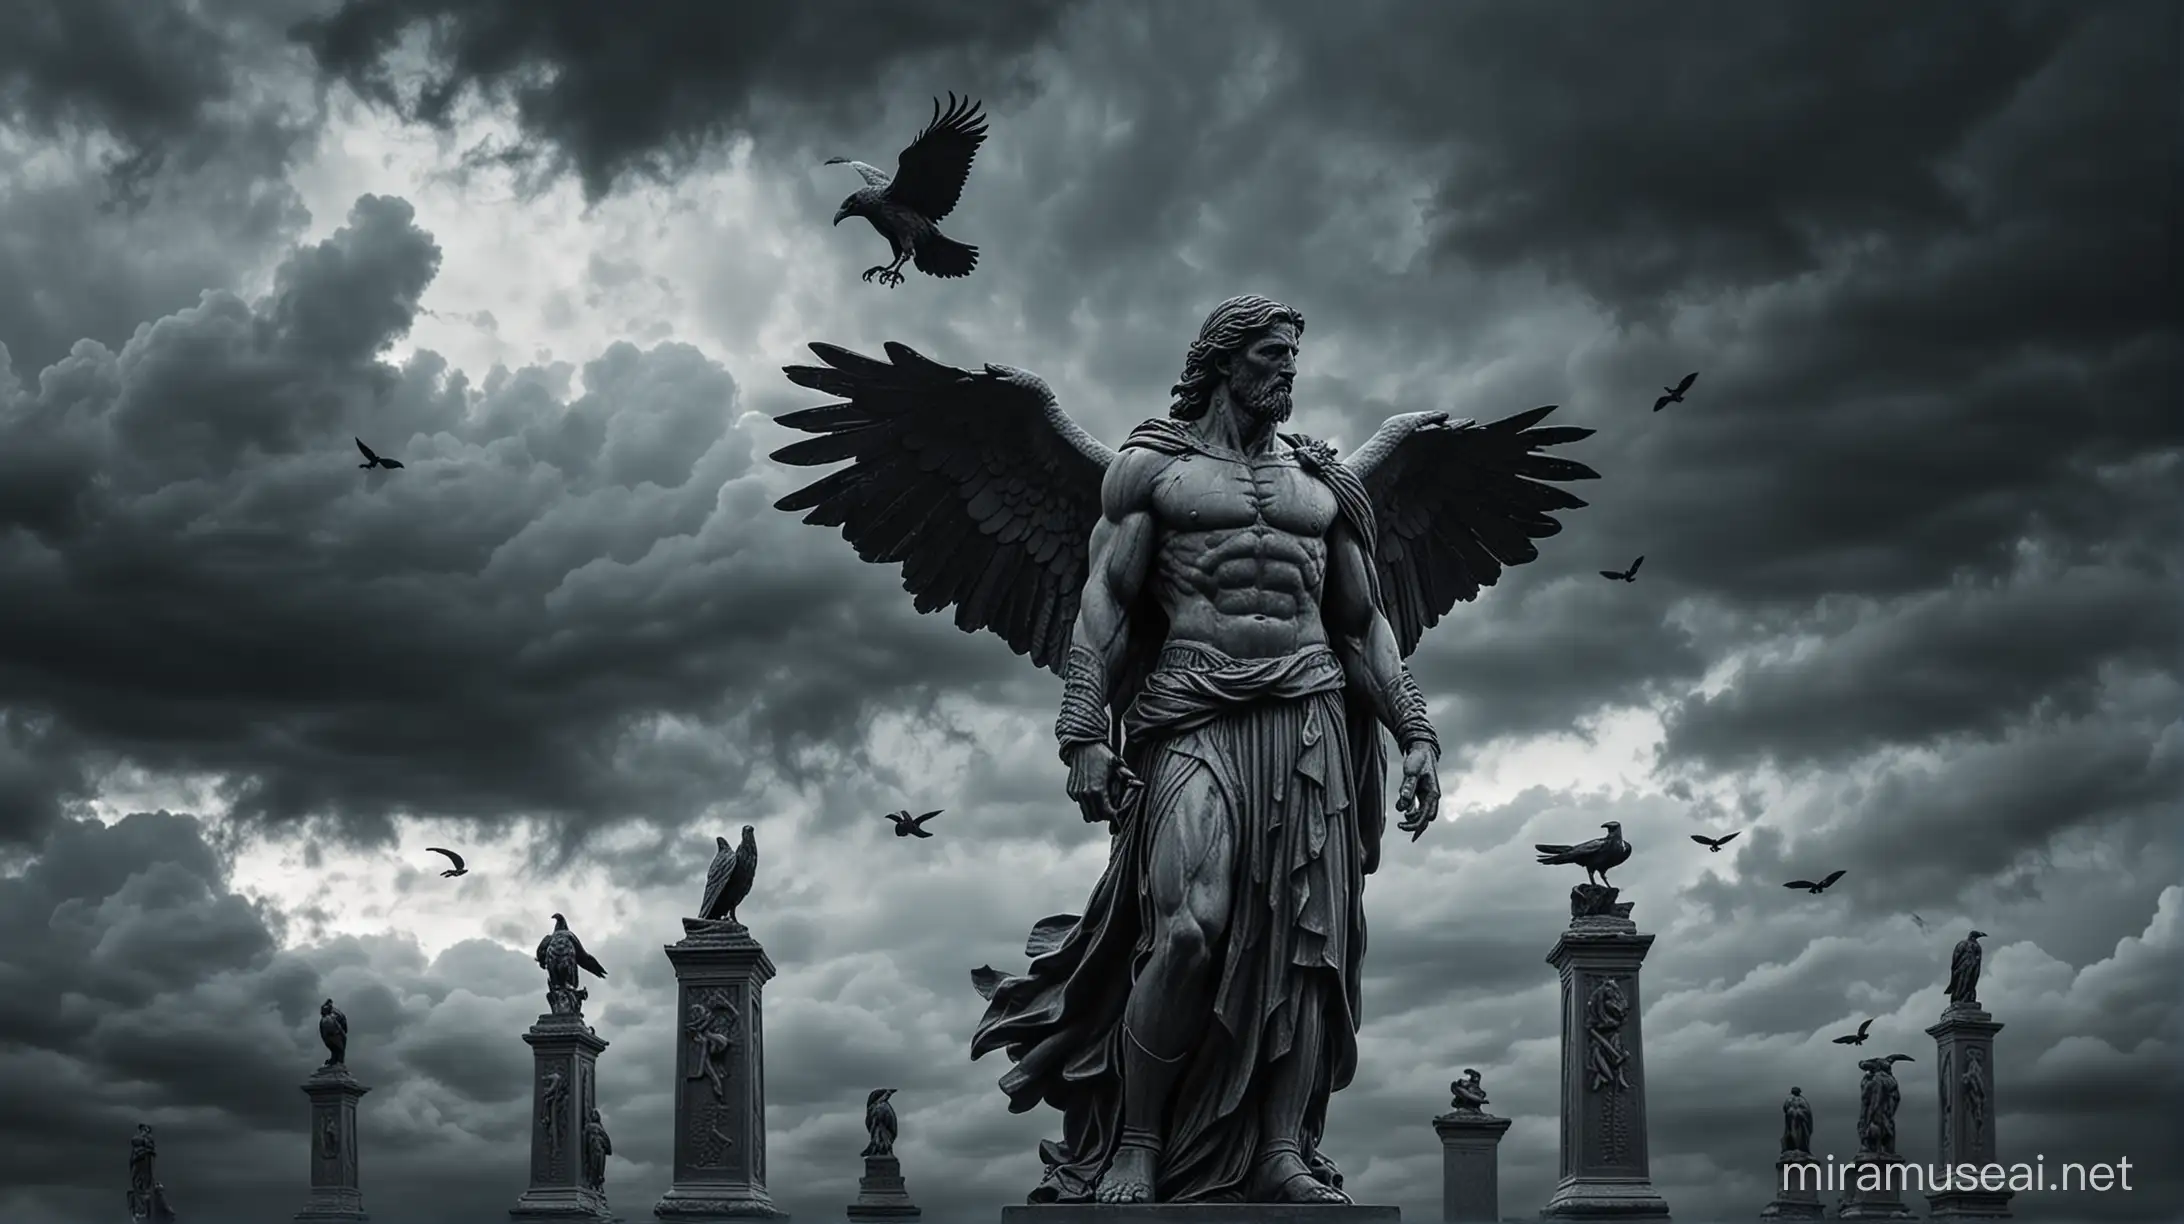 Stoicism, Motivation, stoic muscular statues inside , dark, stoic background horizontal. gray glow of clouds behind the figure of flying ravens